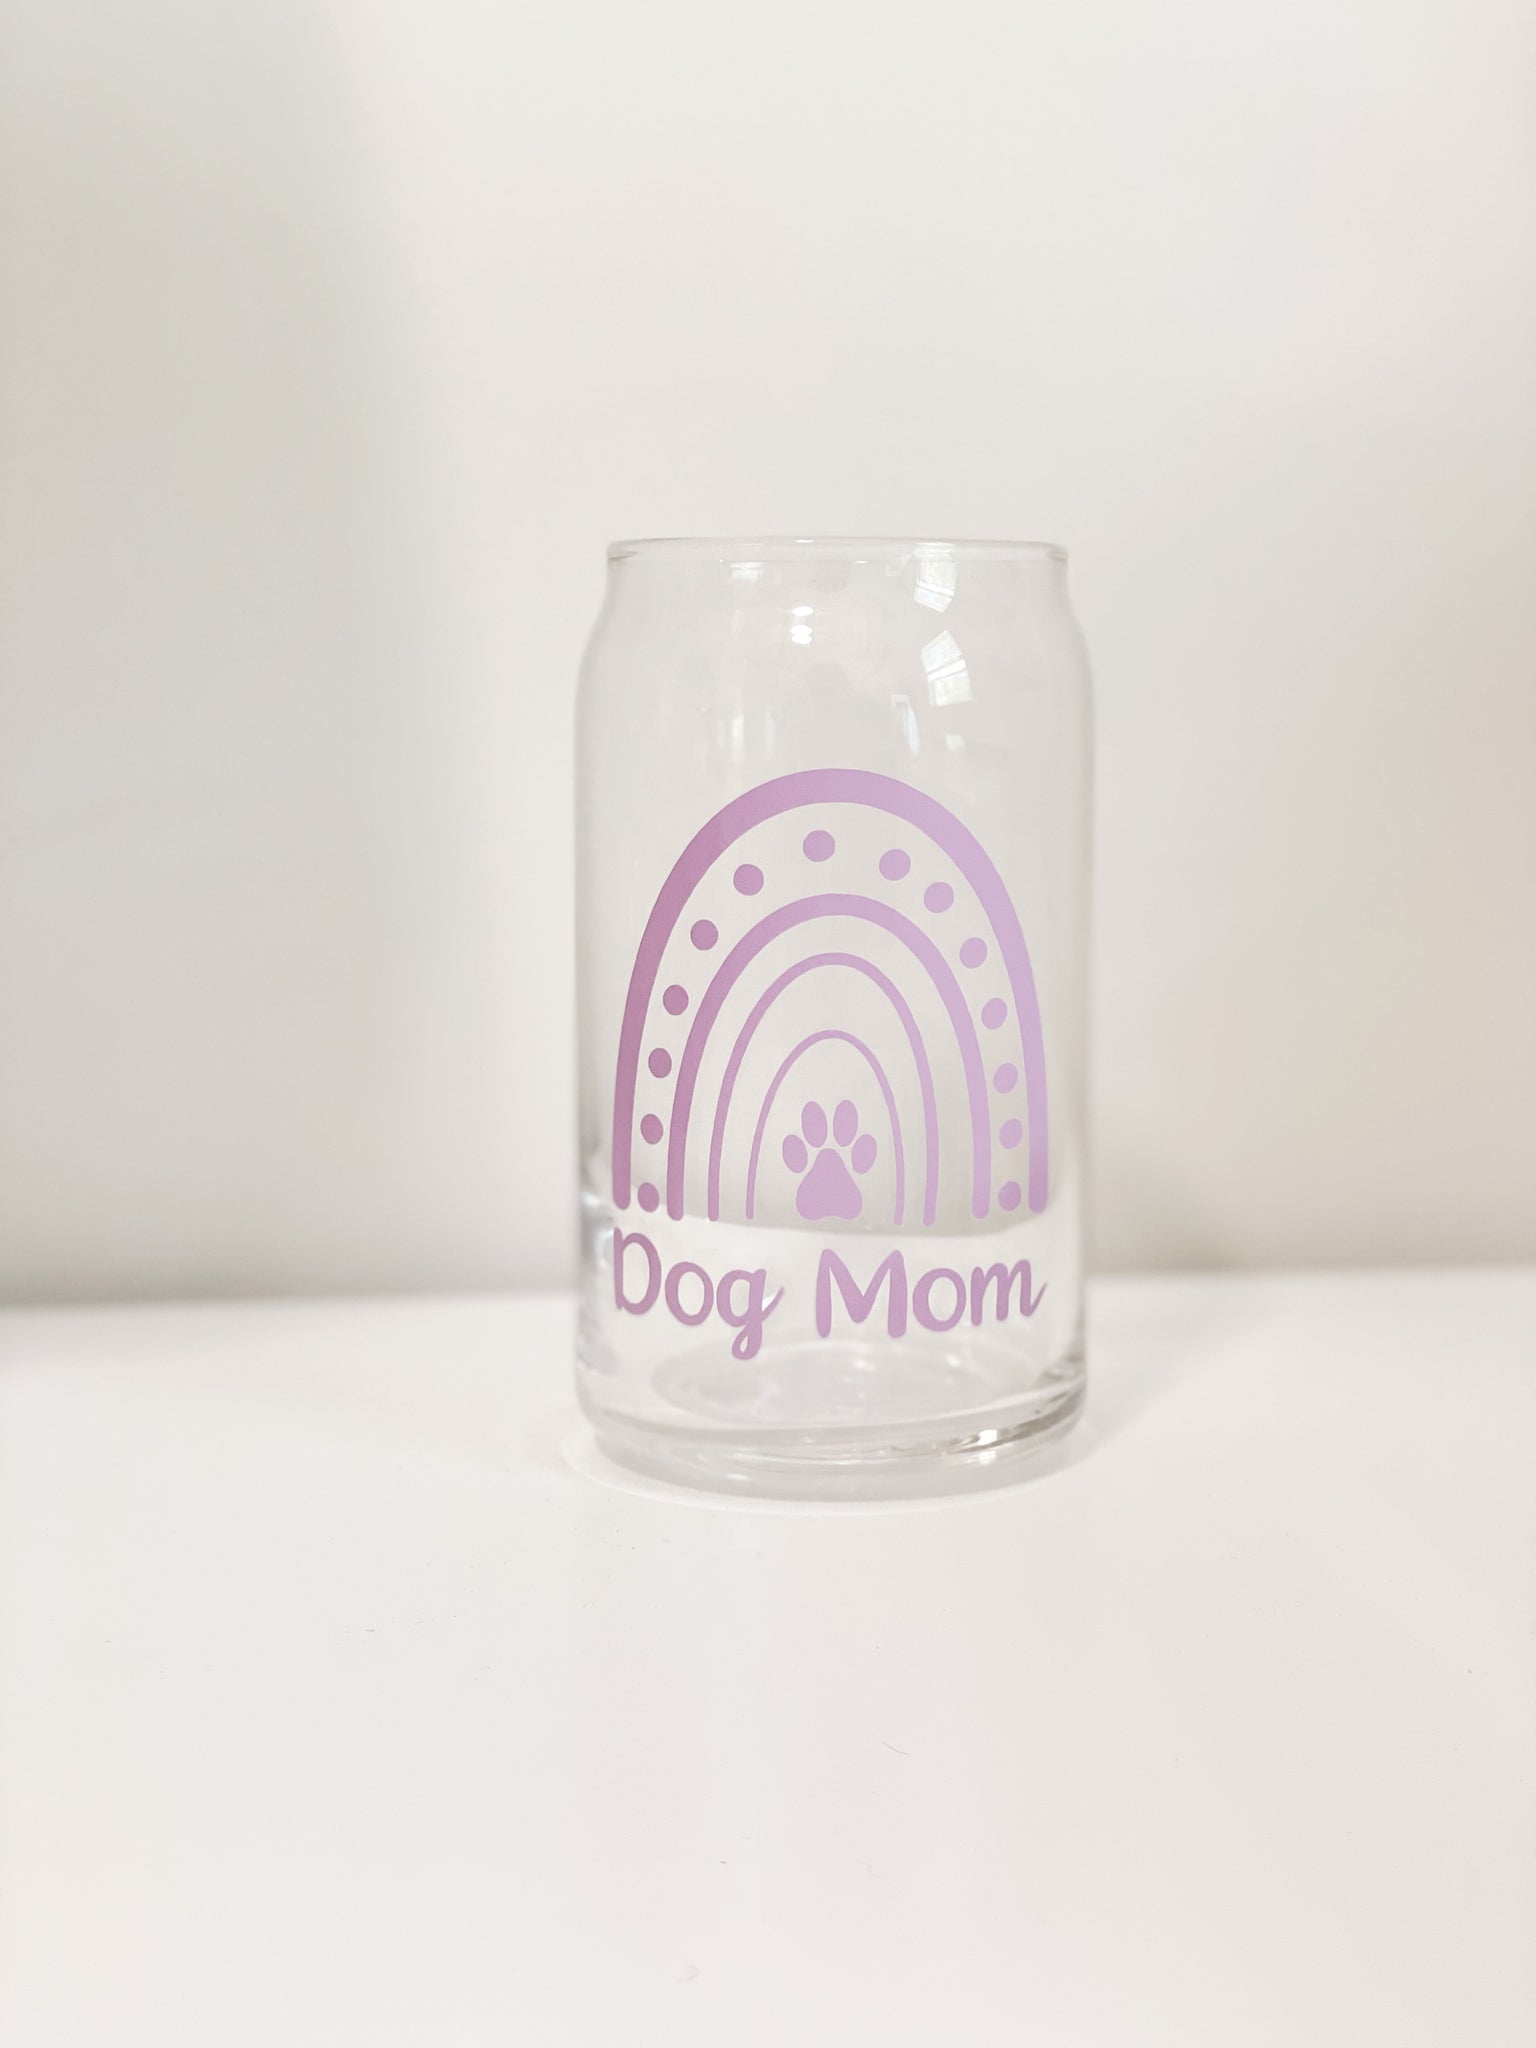 Desert Dog Paw Glass Cup Dog Mom Glass Cup Dog Beer Glass 